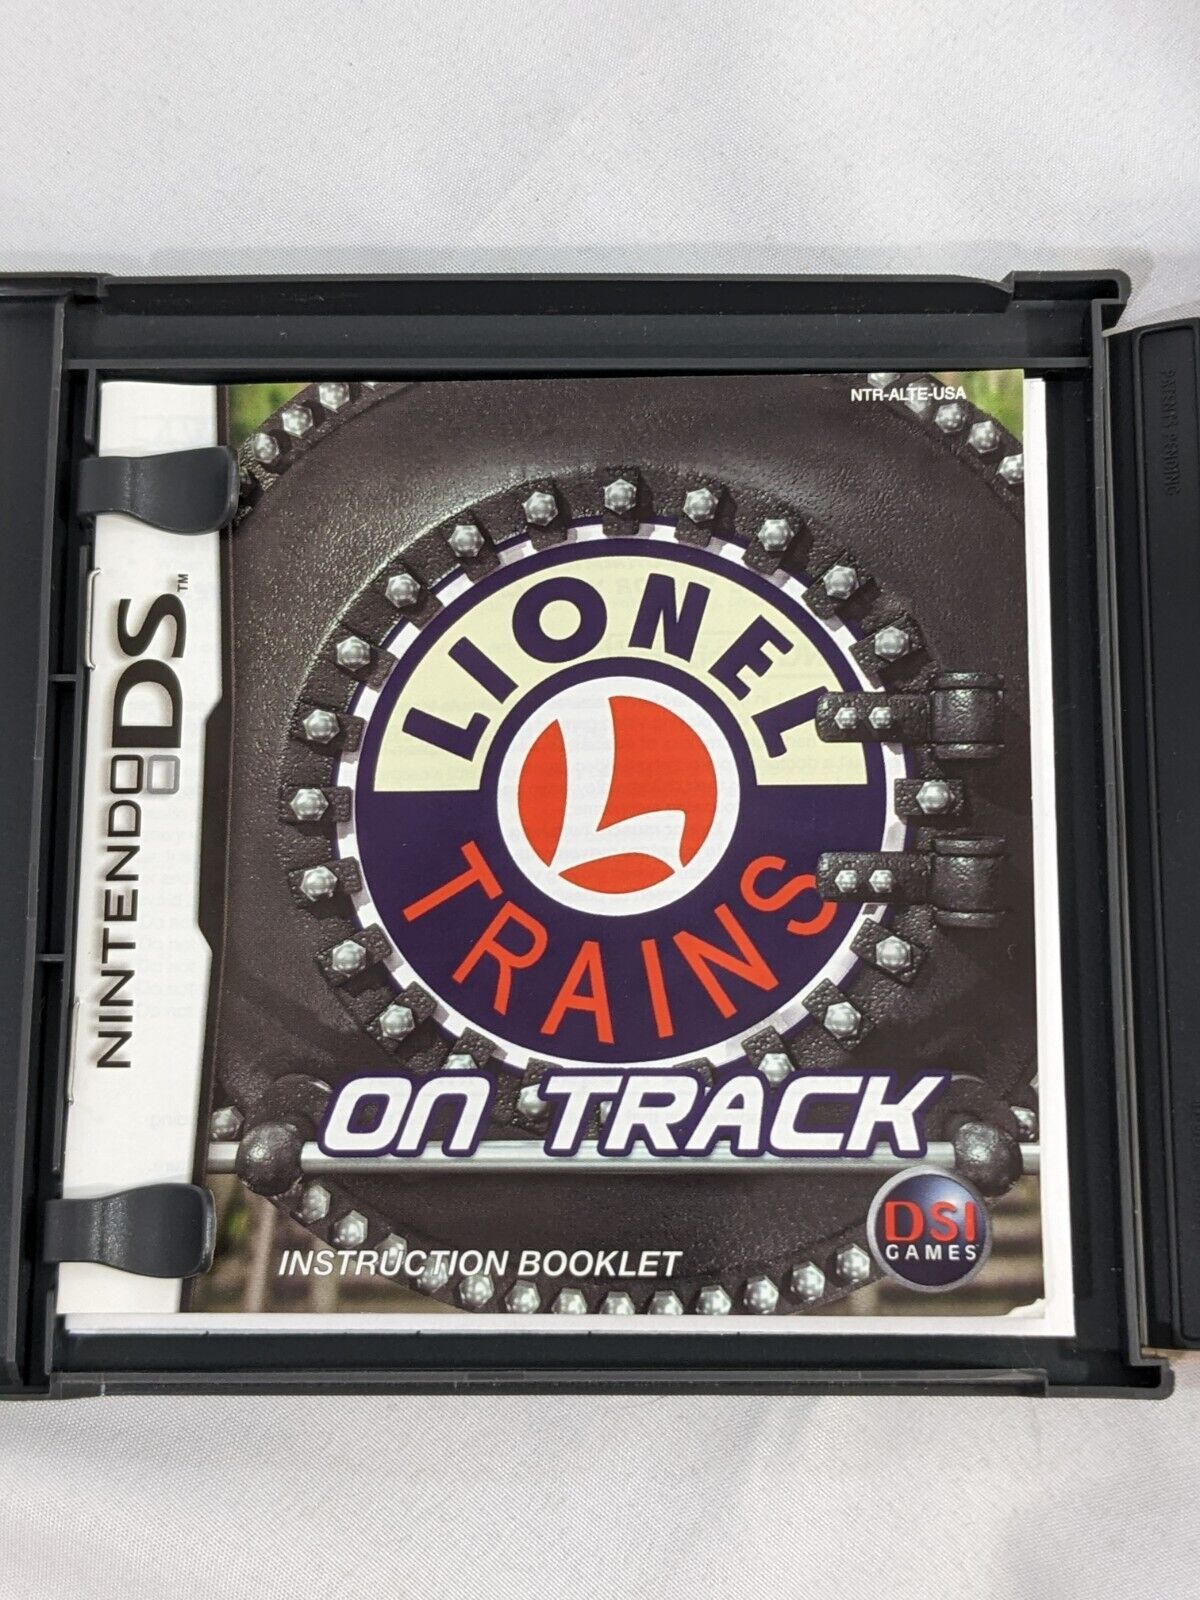 Nintendo DS Lionel Trains on Track Manual & Cartridge Game Case Only